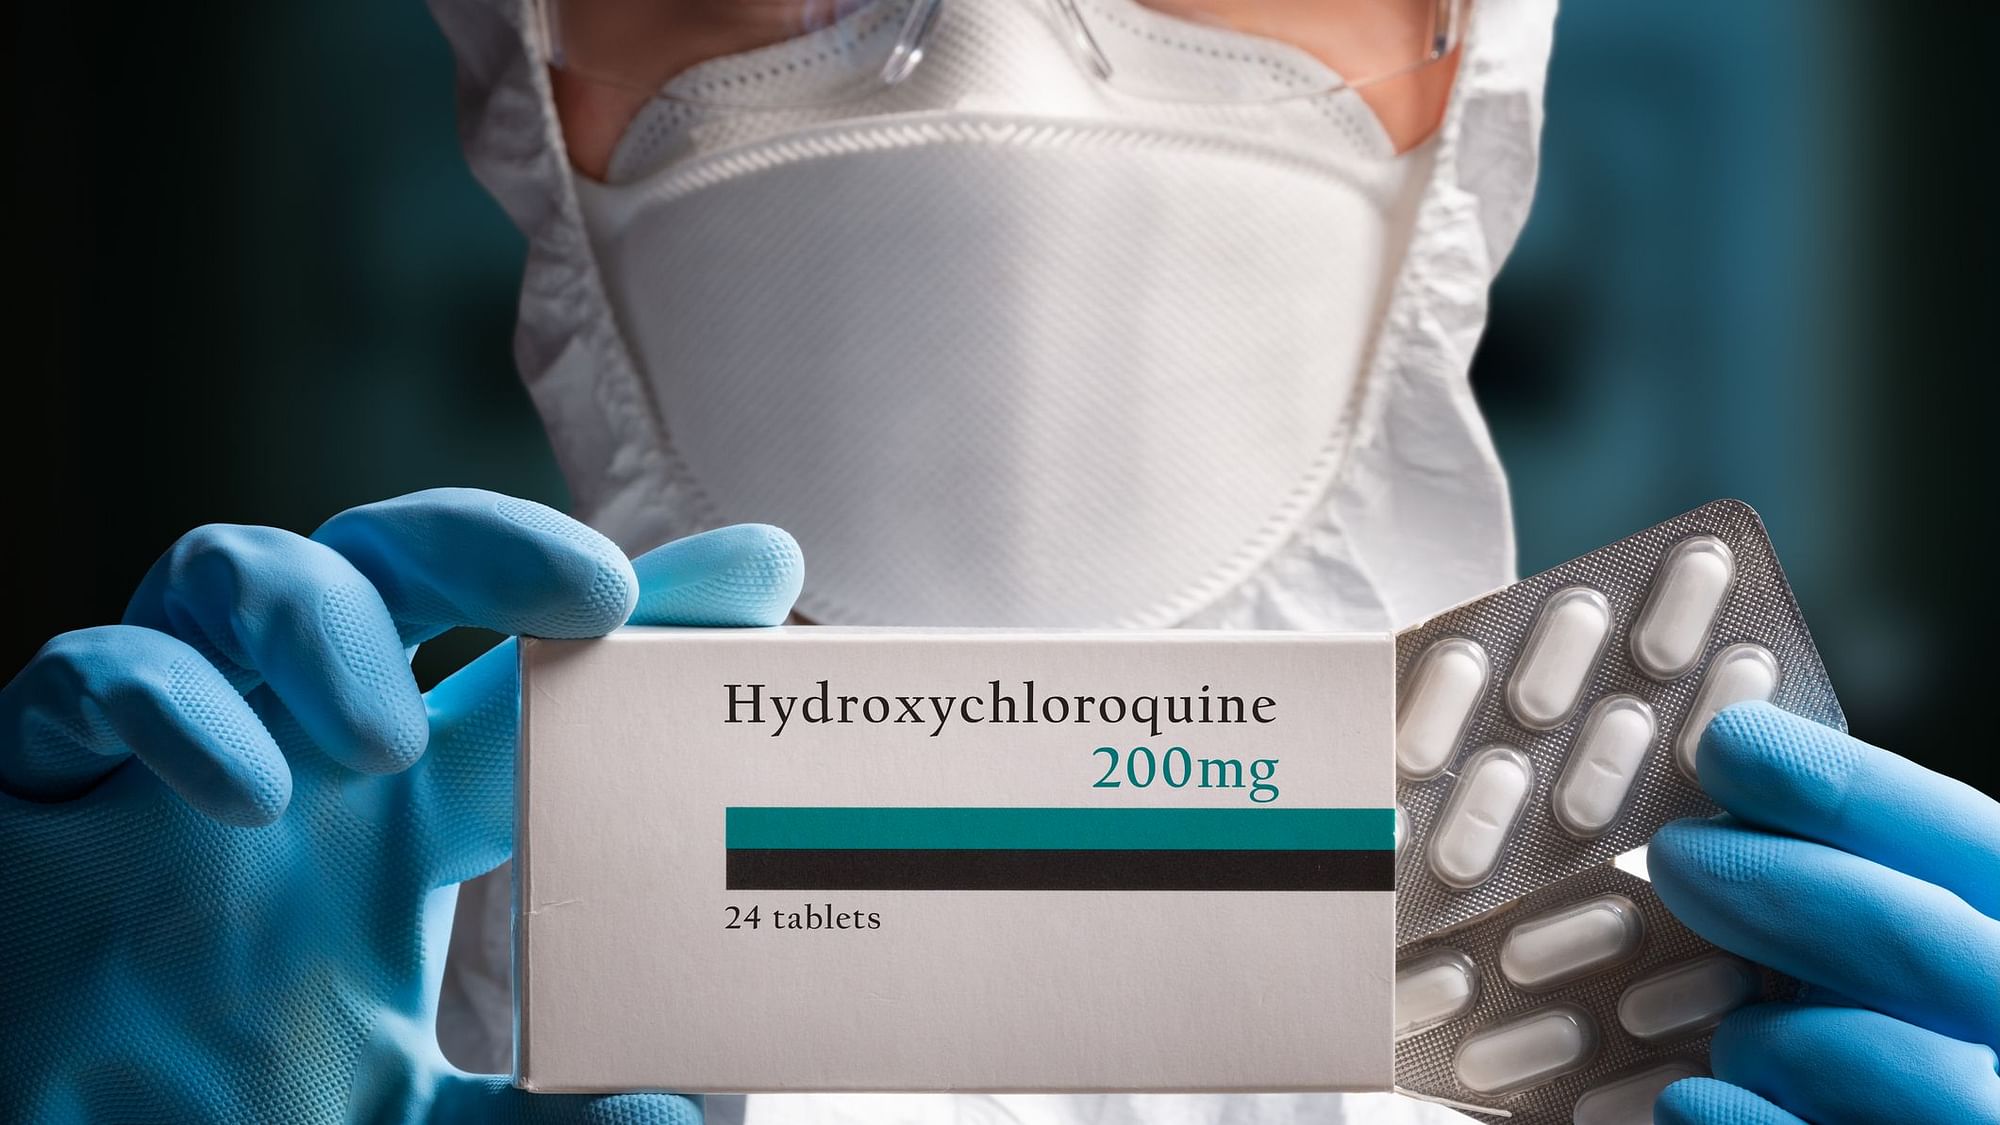 Soon after the study was published, large randomised trials of chloroquine and hydroxychloroquine came to a sudden halt.